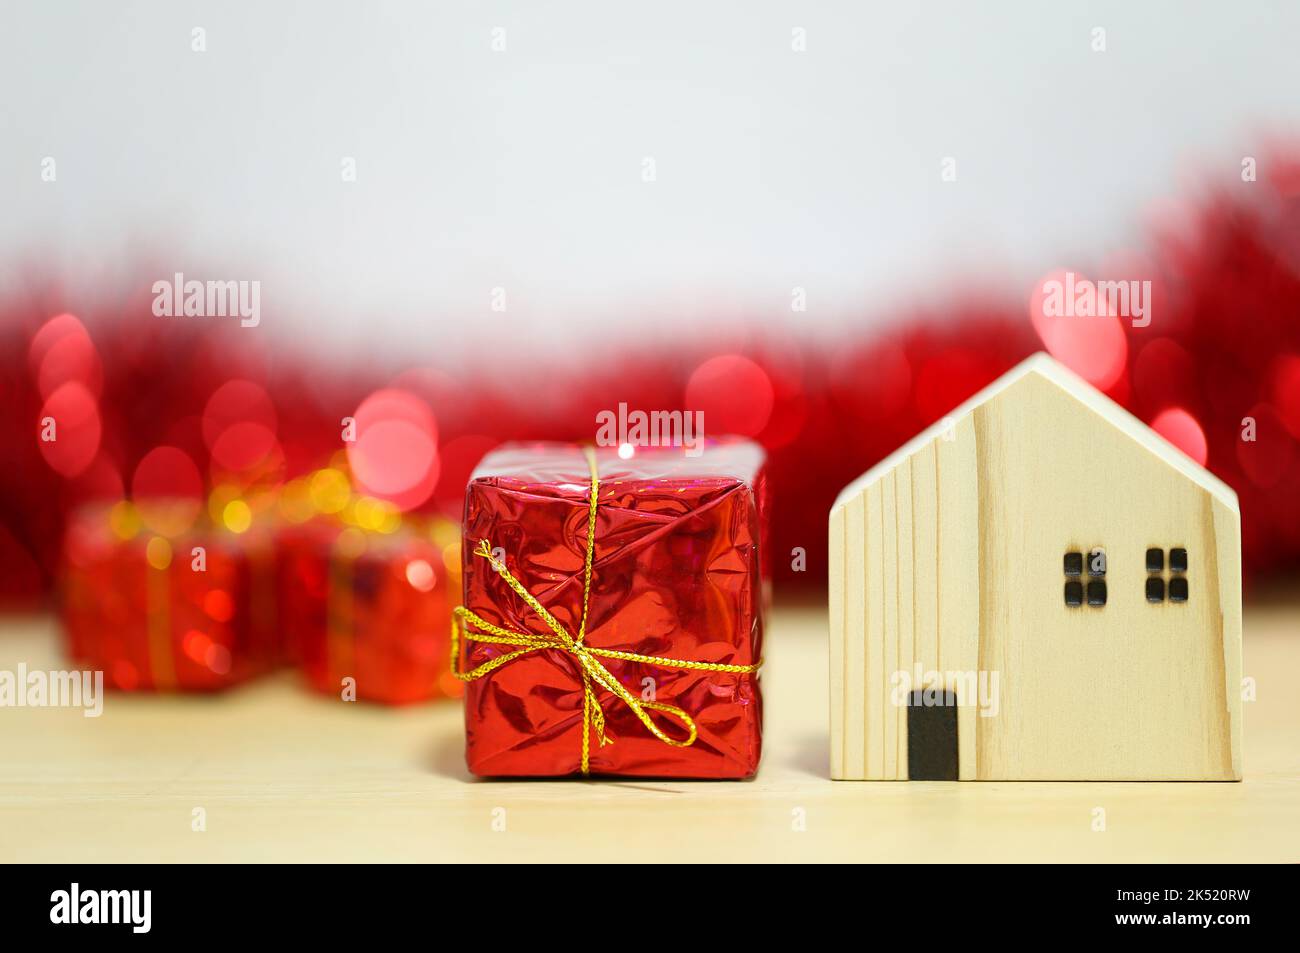 Red gift box and wooden house model in the concept of New Year and Christmas. Stock Photo